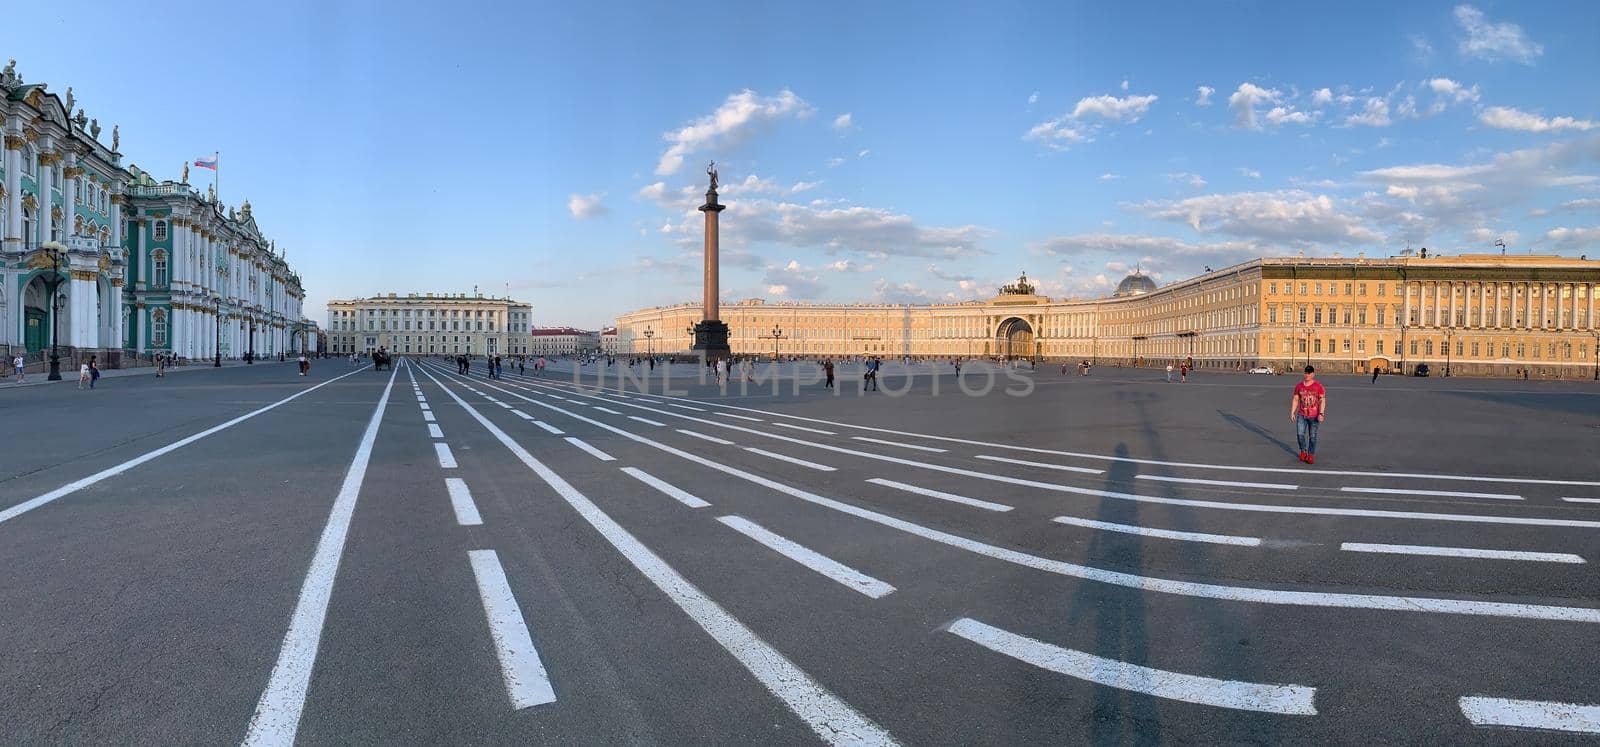 Russia, St.Petersburg, 09 June 2020: Specular panoramic image of the Palace square at sunset, residents walk across square, the Alexandria column on a background by vladimirdrozdin